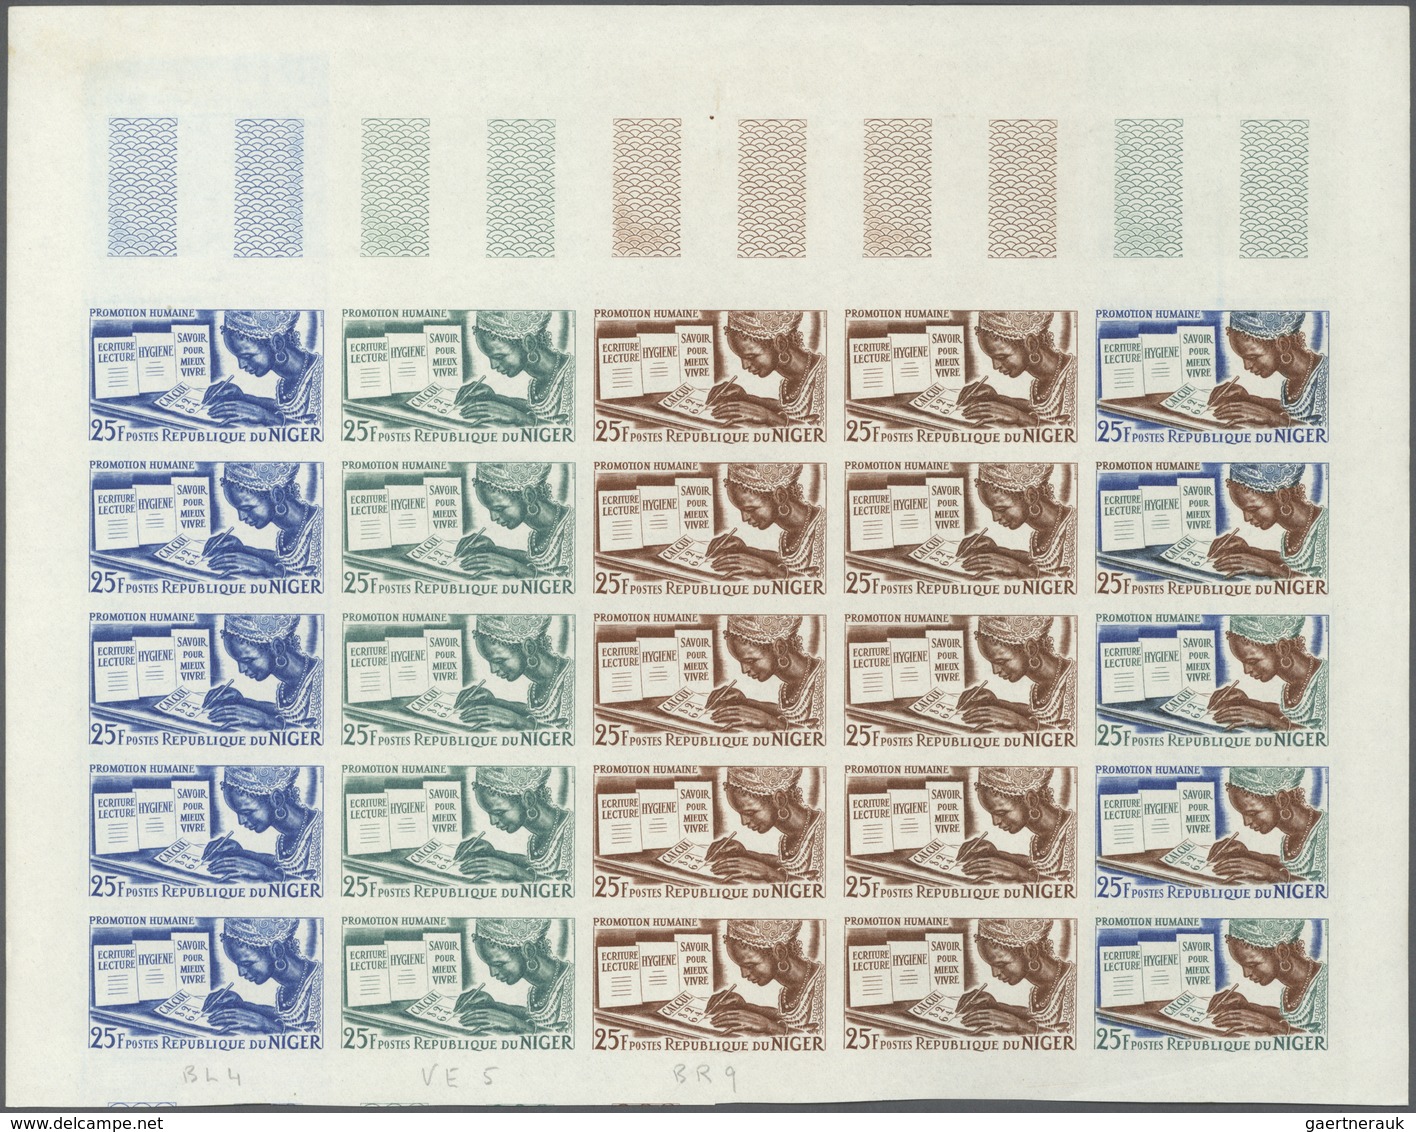 Niger: 1965. Complete set "Adult Education" (4 values) in 4 color proof sheets of 25. Each sheet cut